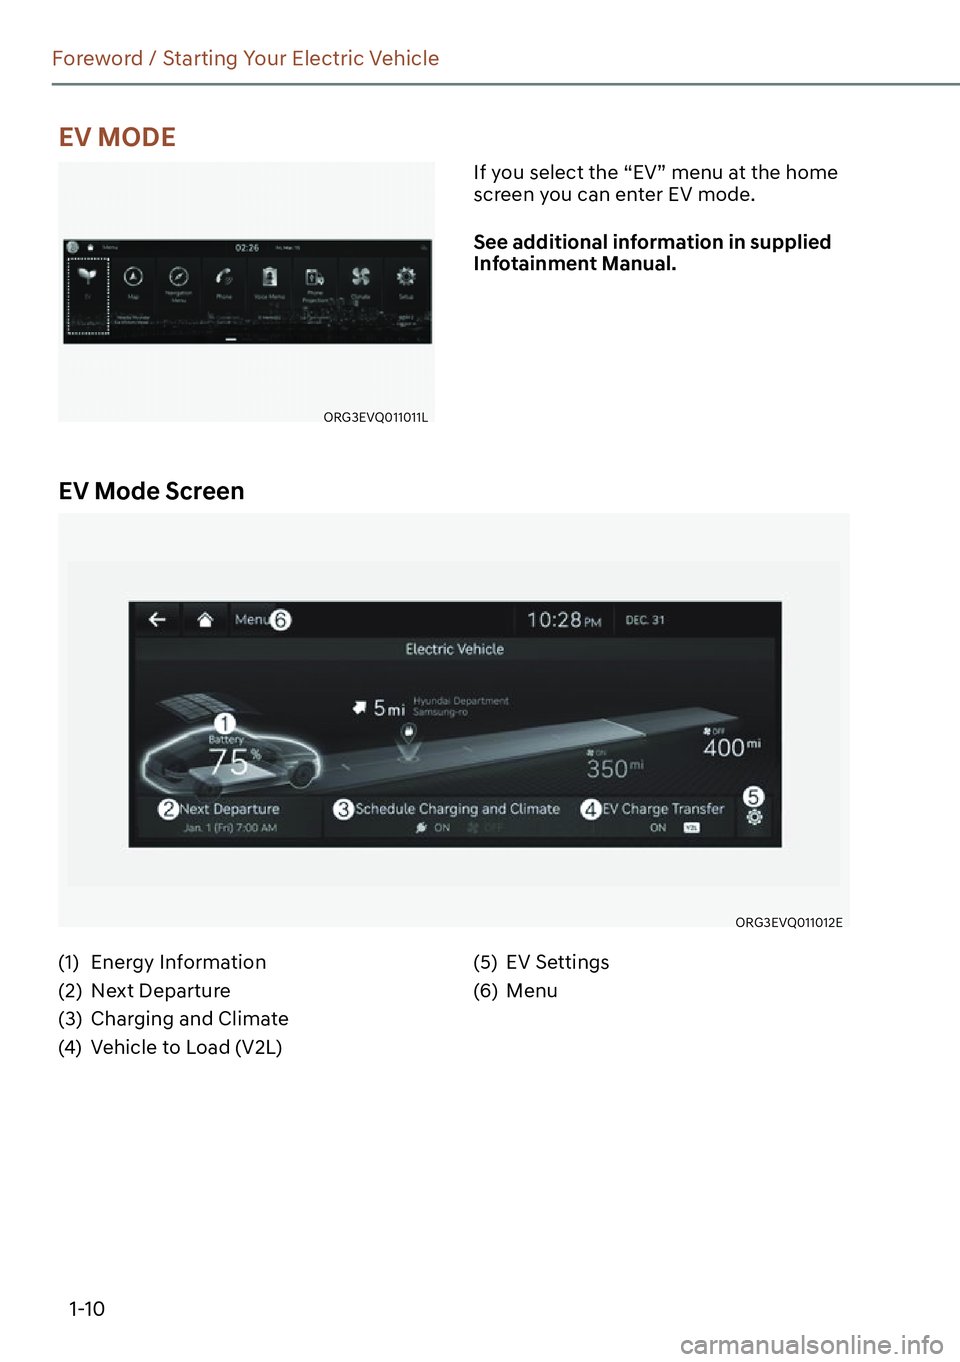 GENESIS G80 2023  Owners Manual 1-10
Foreword / Starting Your Electric Vehicle
EV Mode Screen
ORG3EVQ011012E
EV MODE
ORG3EVQ011011L
If you select the “EV” menu at the home 
screen you can enter EV mode.
See additional informatio